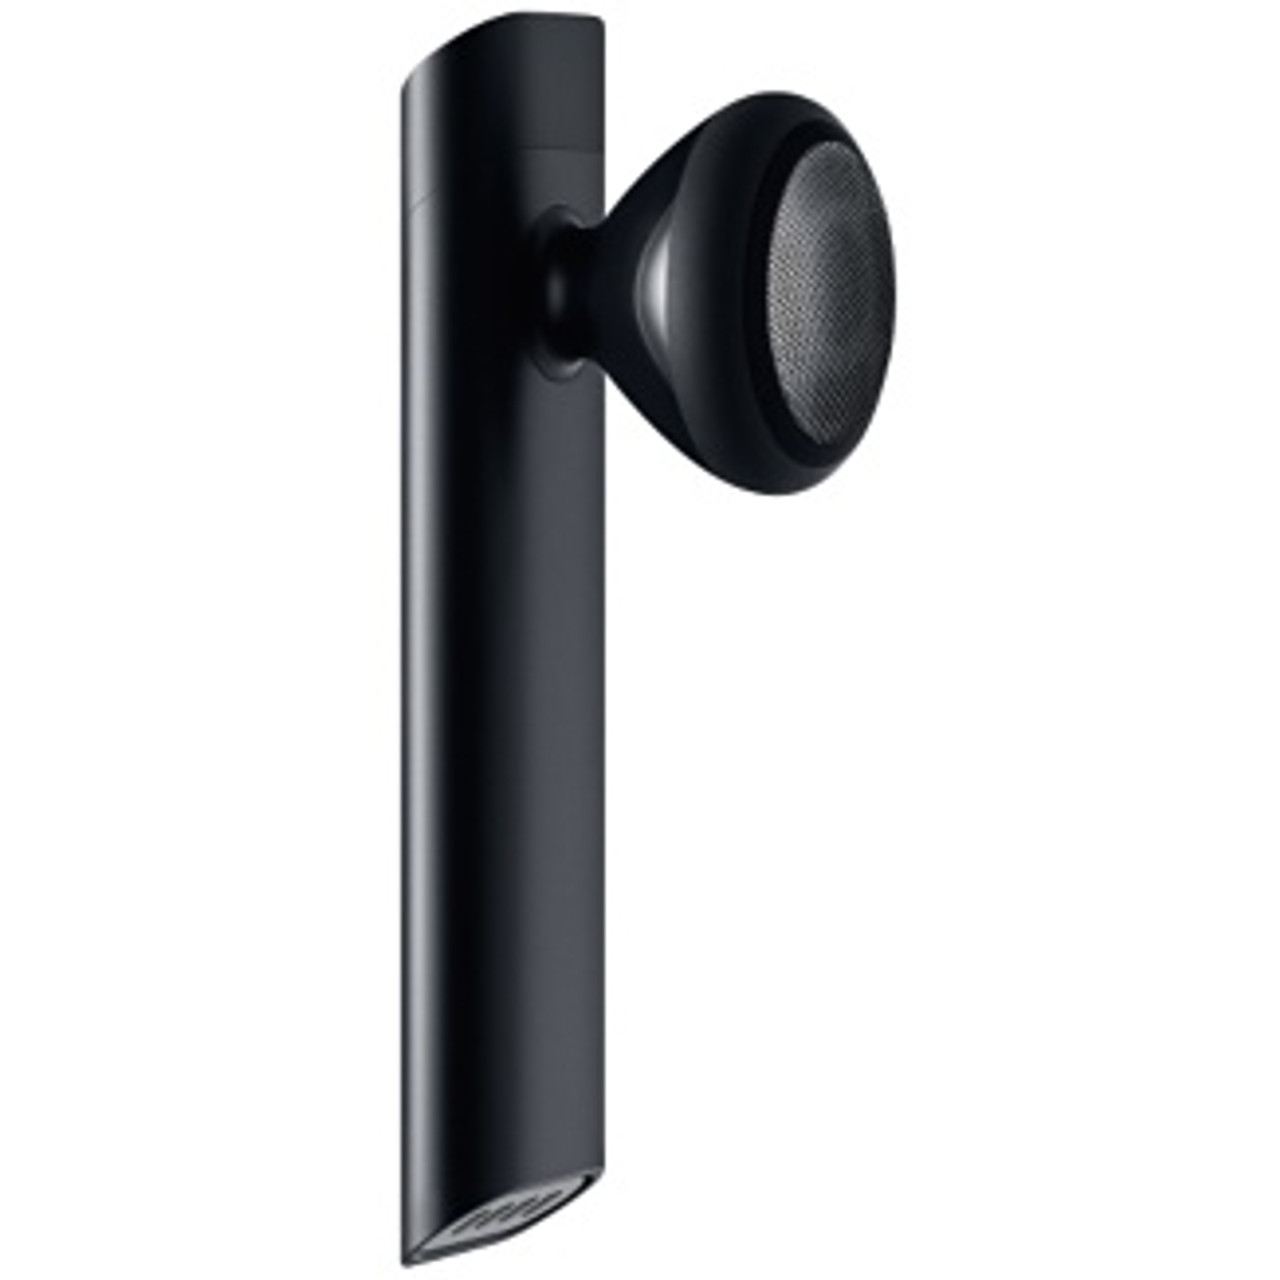 hypothese paneel Mok Sample Product] Apple iPhone Bluetooth Headset - Test store